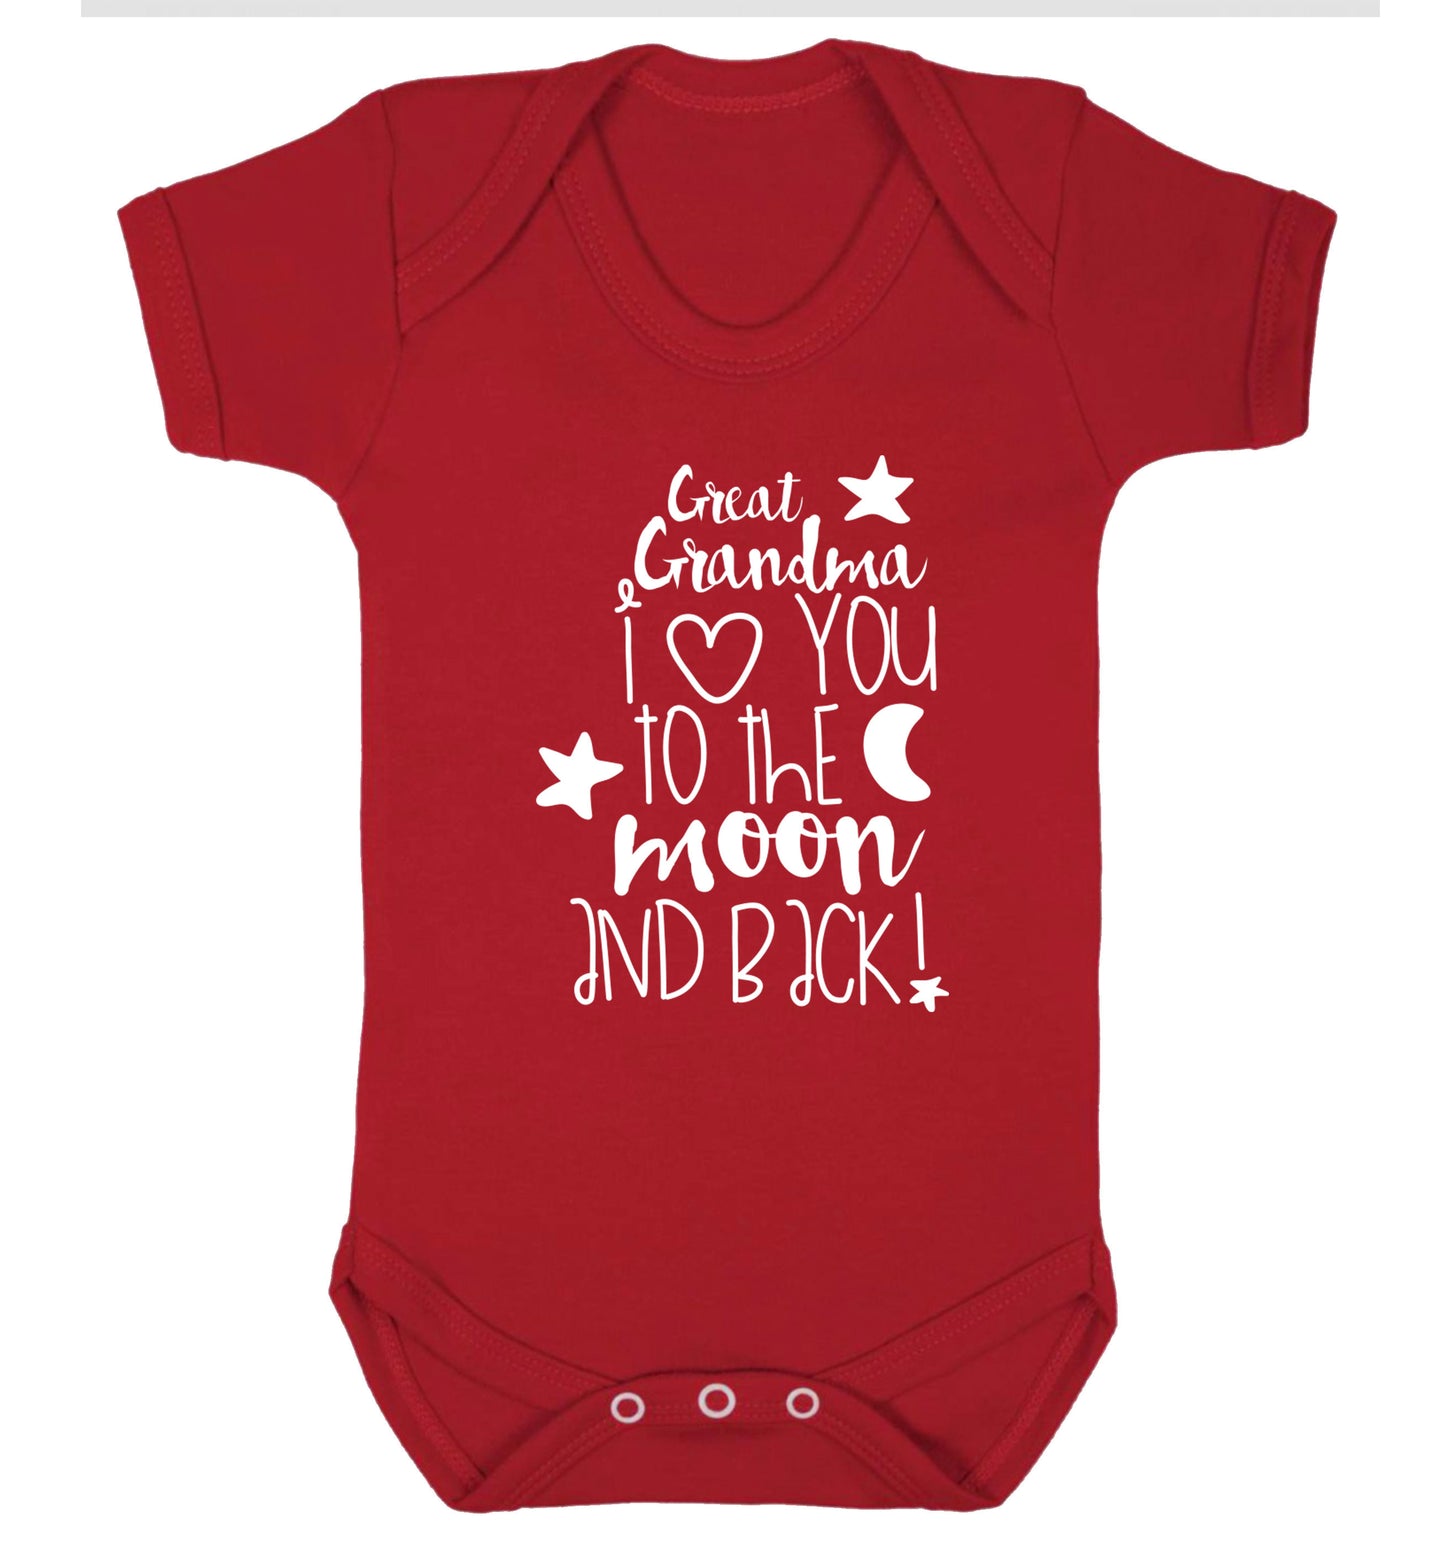 Great Grandma I love you to the moon and back Baby Vest red 18-24 months